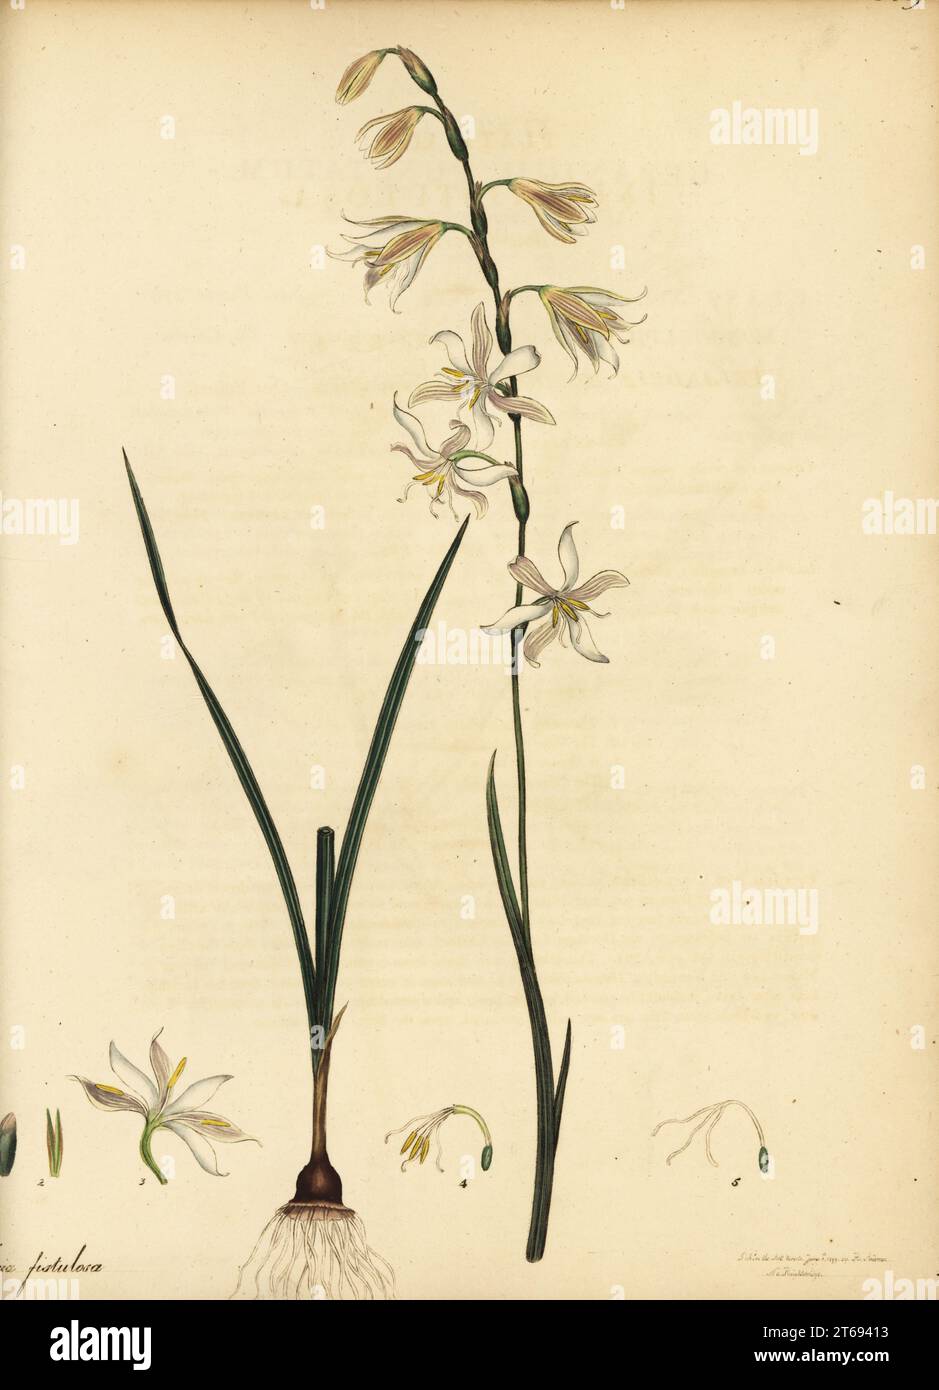 Hesperantha radiata, native to the Cape of Good Hope, South Africa. Hollow-leaved ixia, Ixia fistulosa. Copperplate engraving drawn, engraved and hand-coloured by Henry Andrews from his Botanical Register, Volume 1, published in London, 1799. Stock Photo